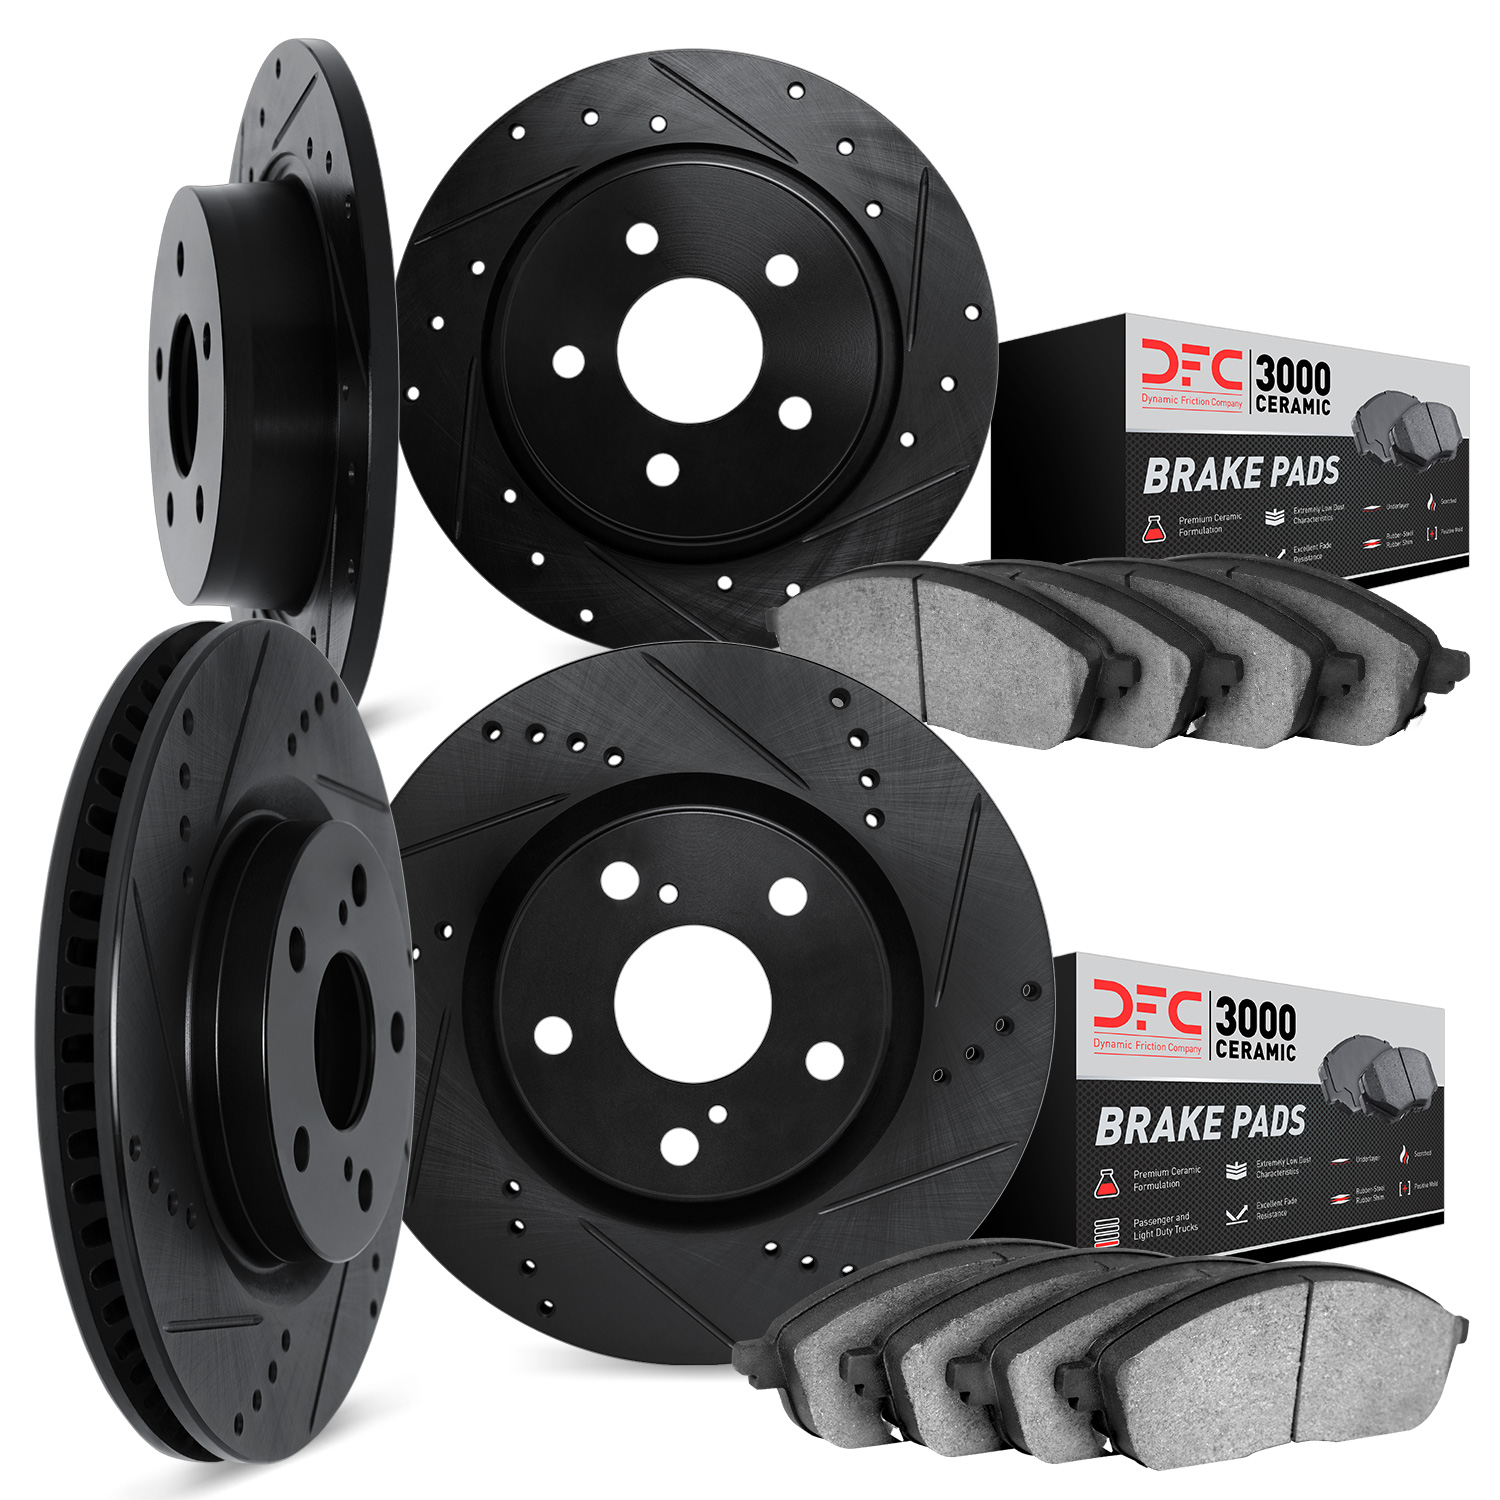 8304-63096 Drilled/Slotted Brake Rotors with 3000-Series Ceramic Brake Pads Kit [Black], 2001-2009 Mercedes-Benz, Position: Fron